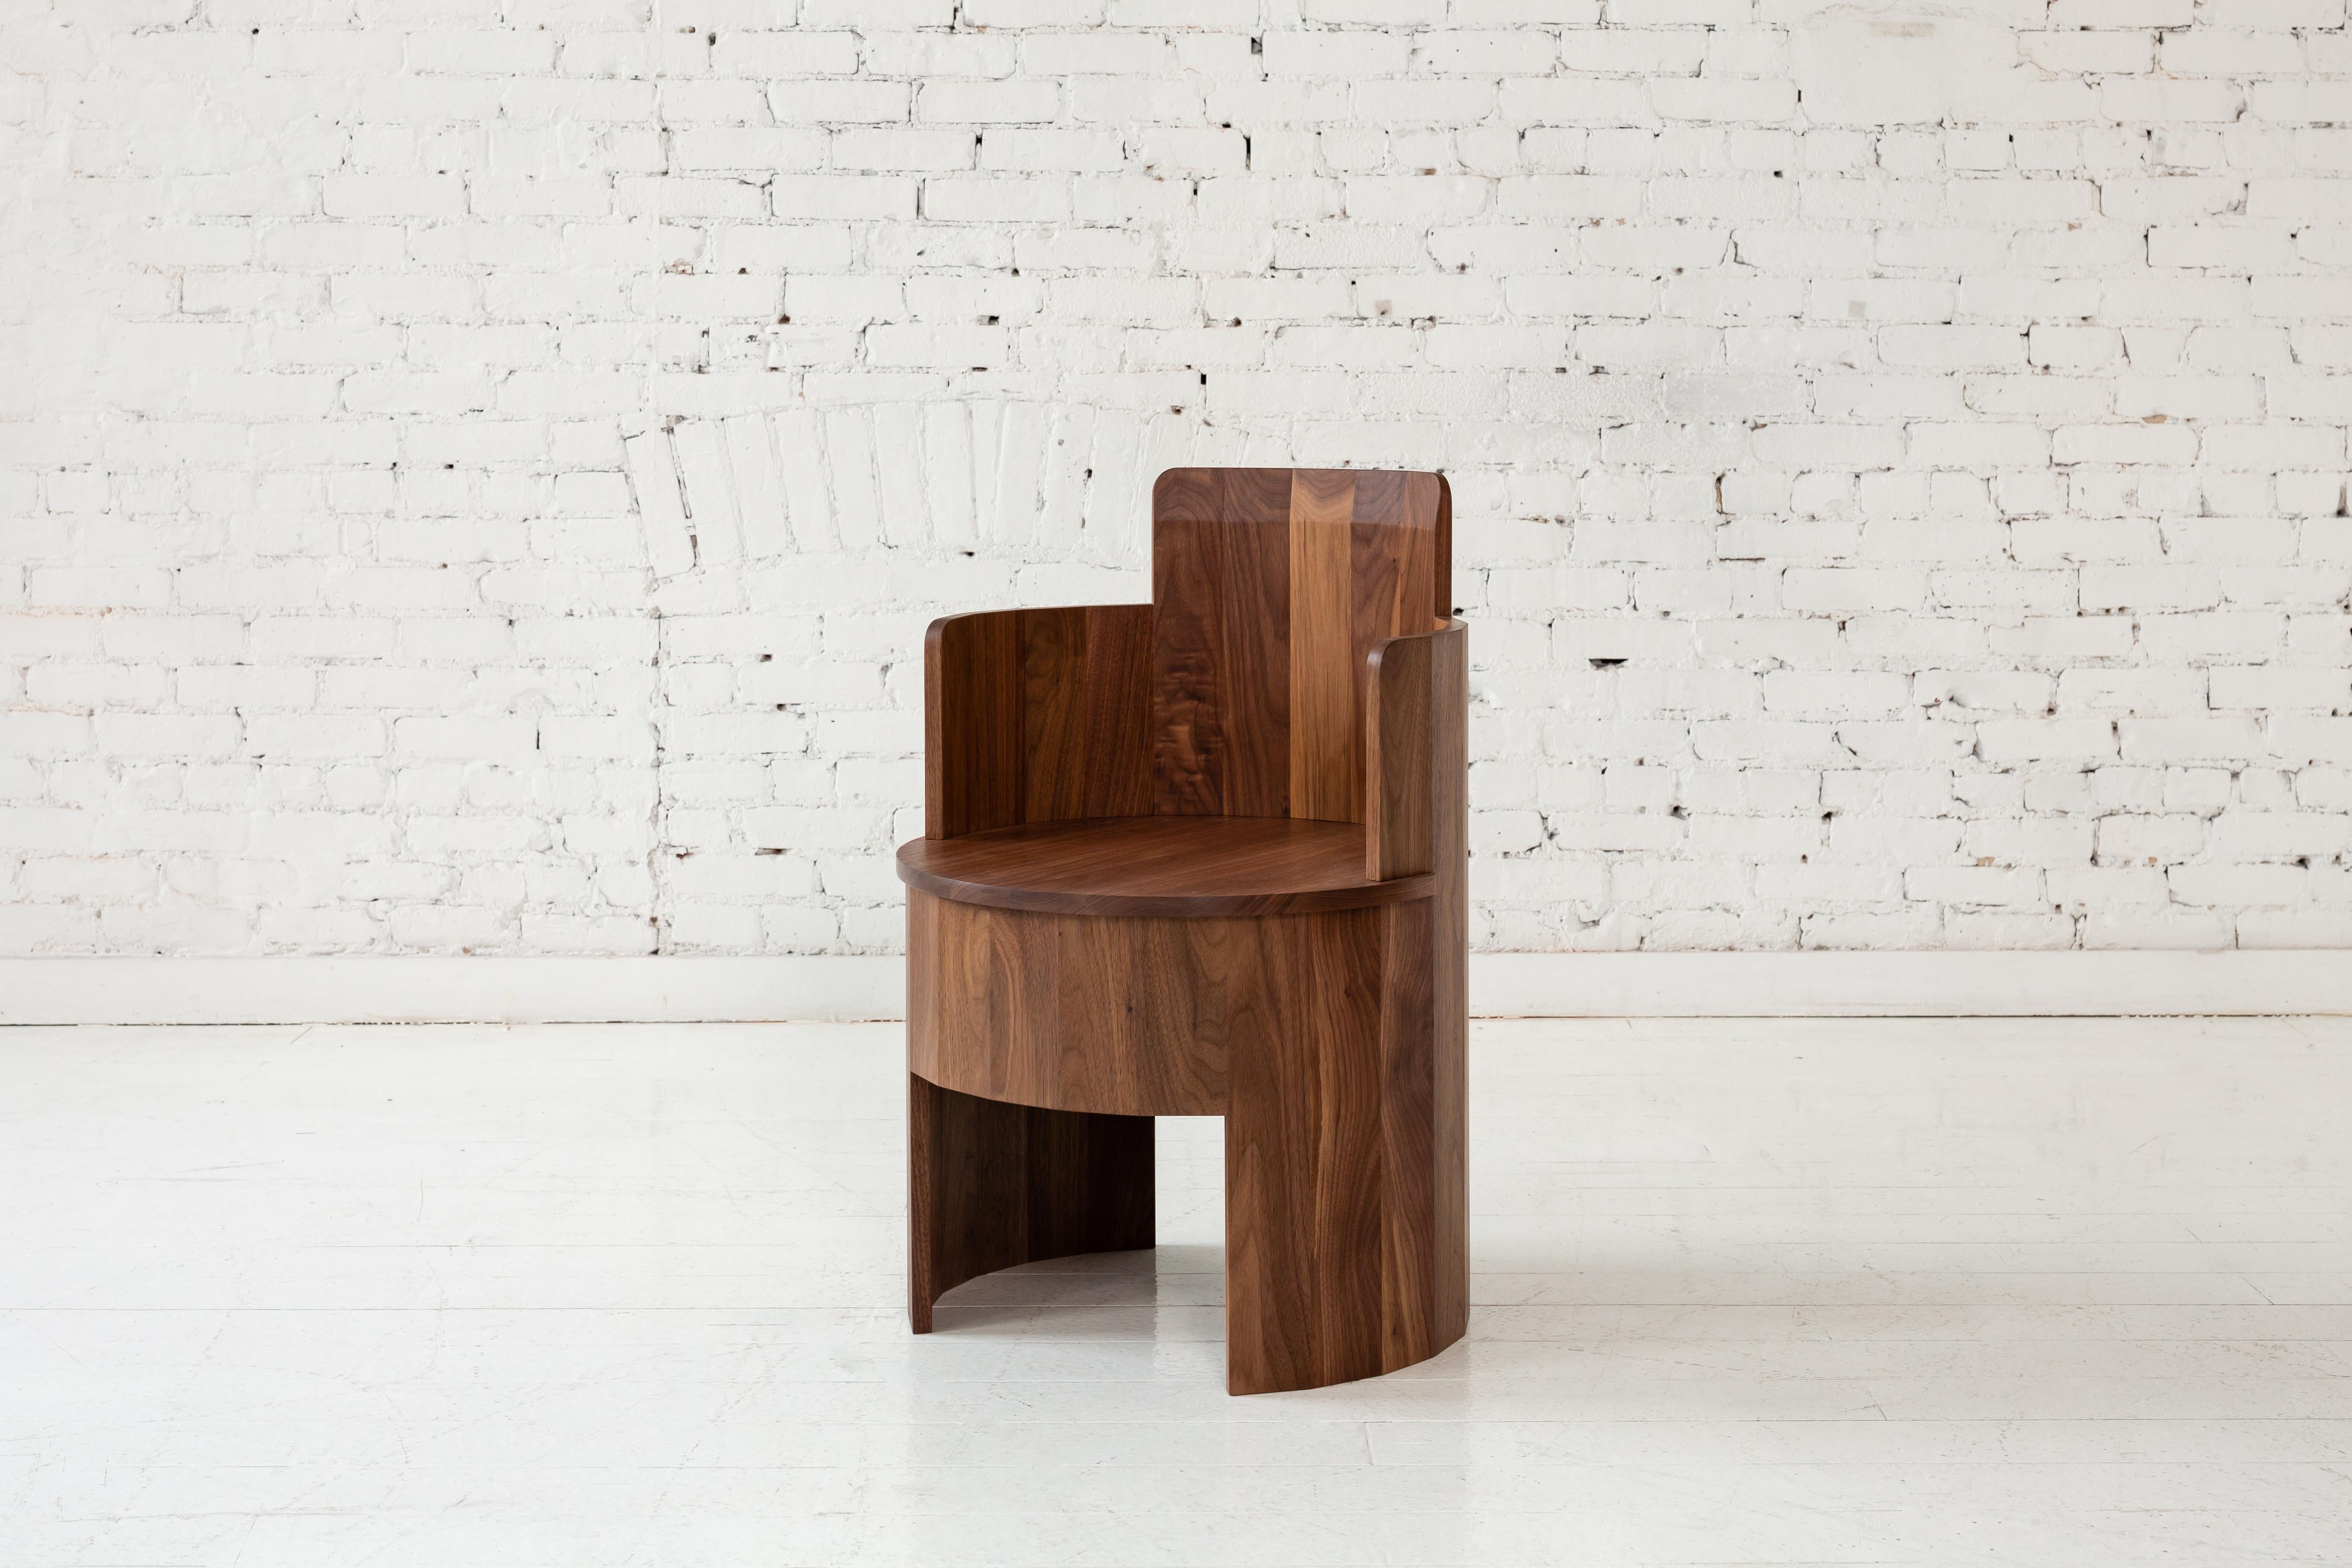 Contemporary White Oak Wood Cooperage Chair by Fort Standard, In Stock In New Condition For Sale In Brooklyn, NY